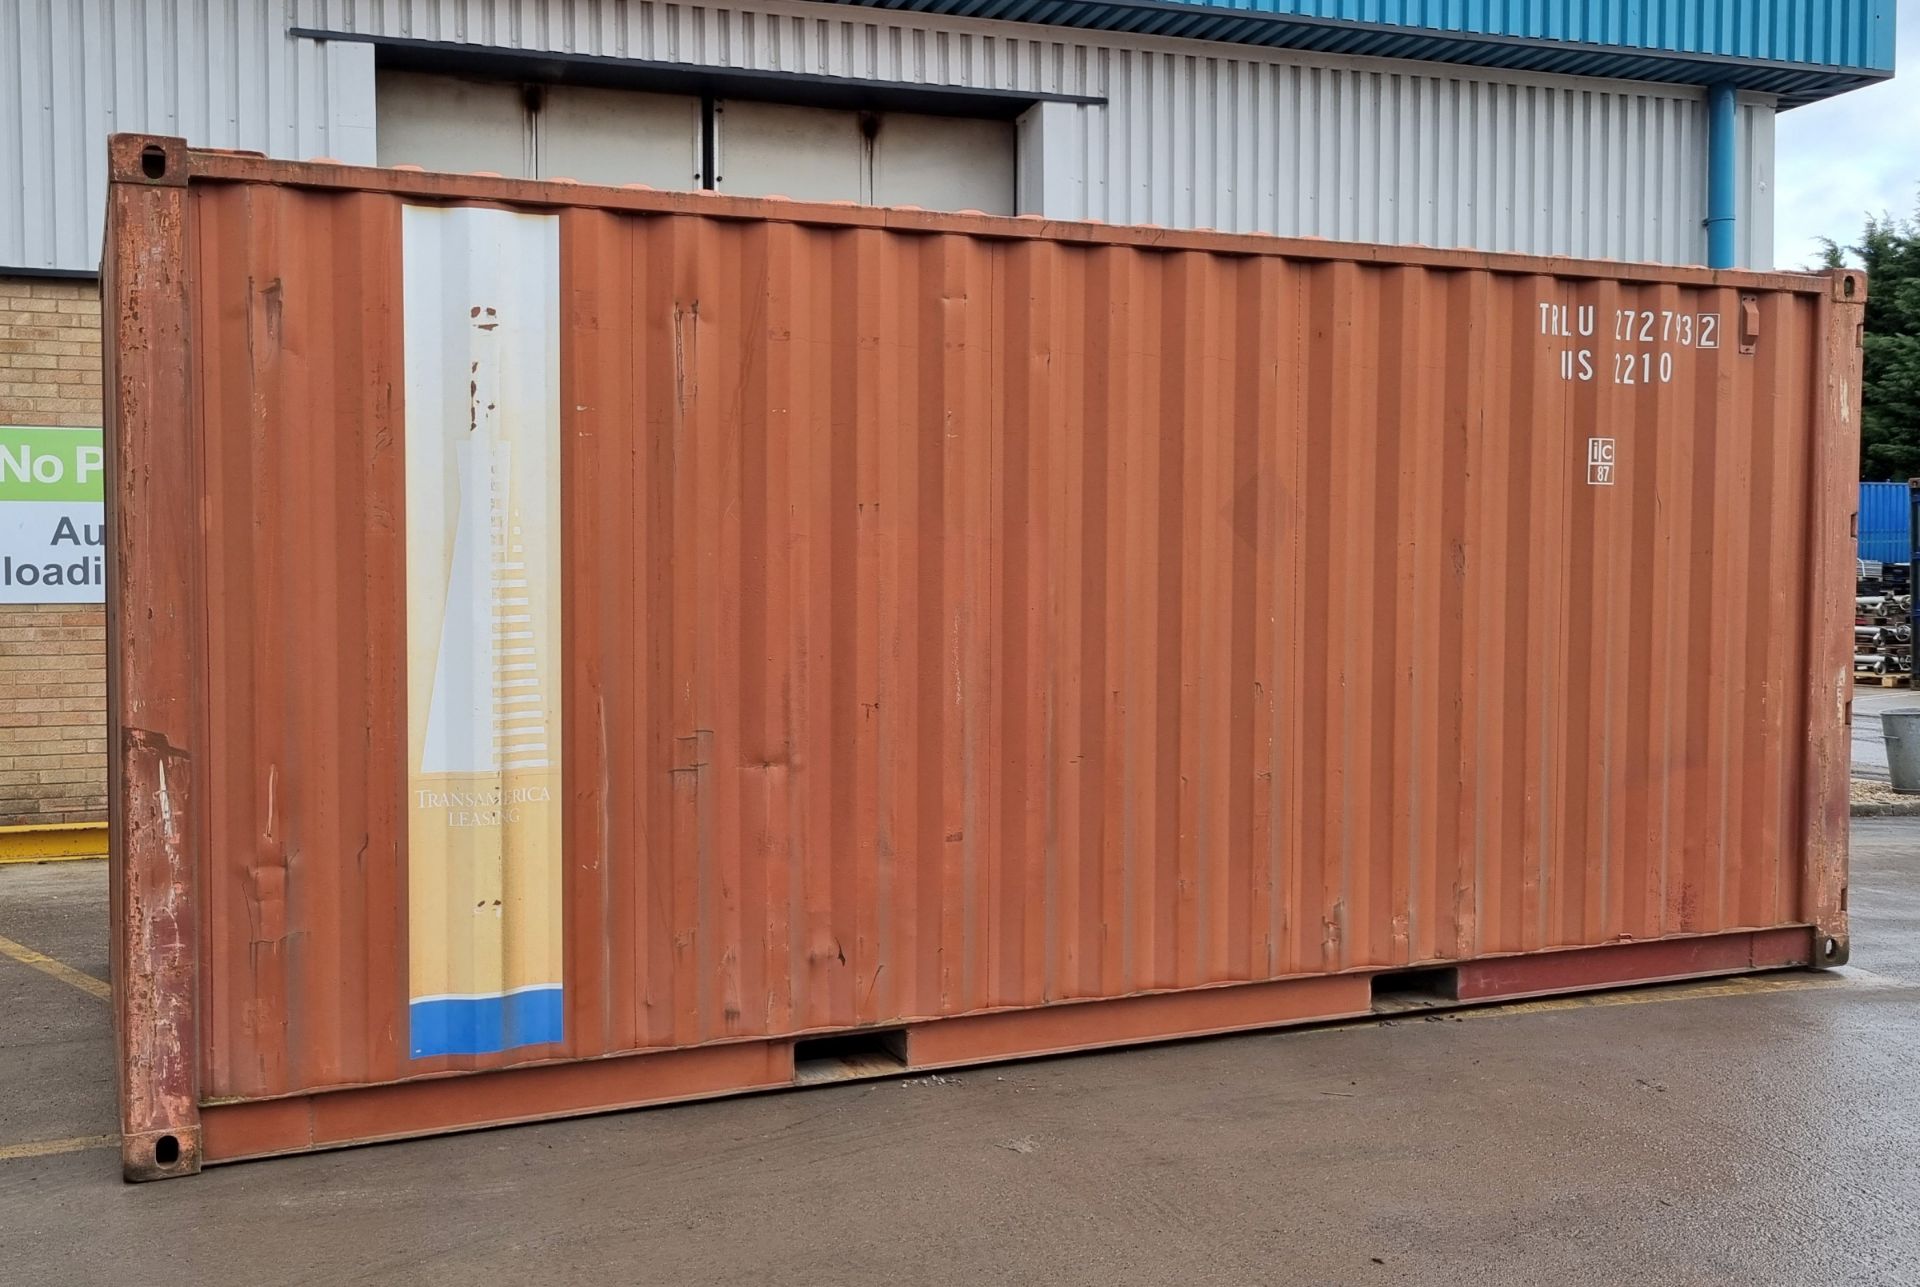 Med Union - Model MU20-1001-TA shipping container - L600 x W240 x H258cm - Image 2 of 12